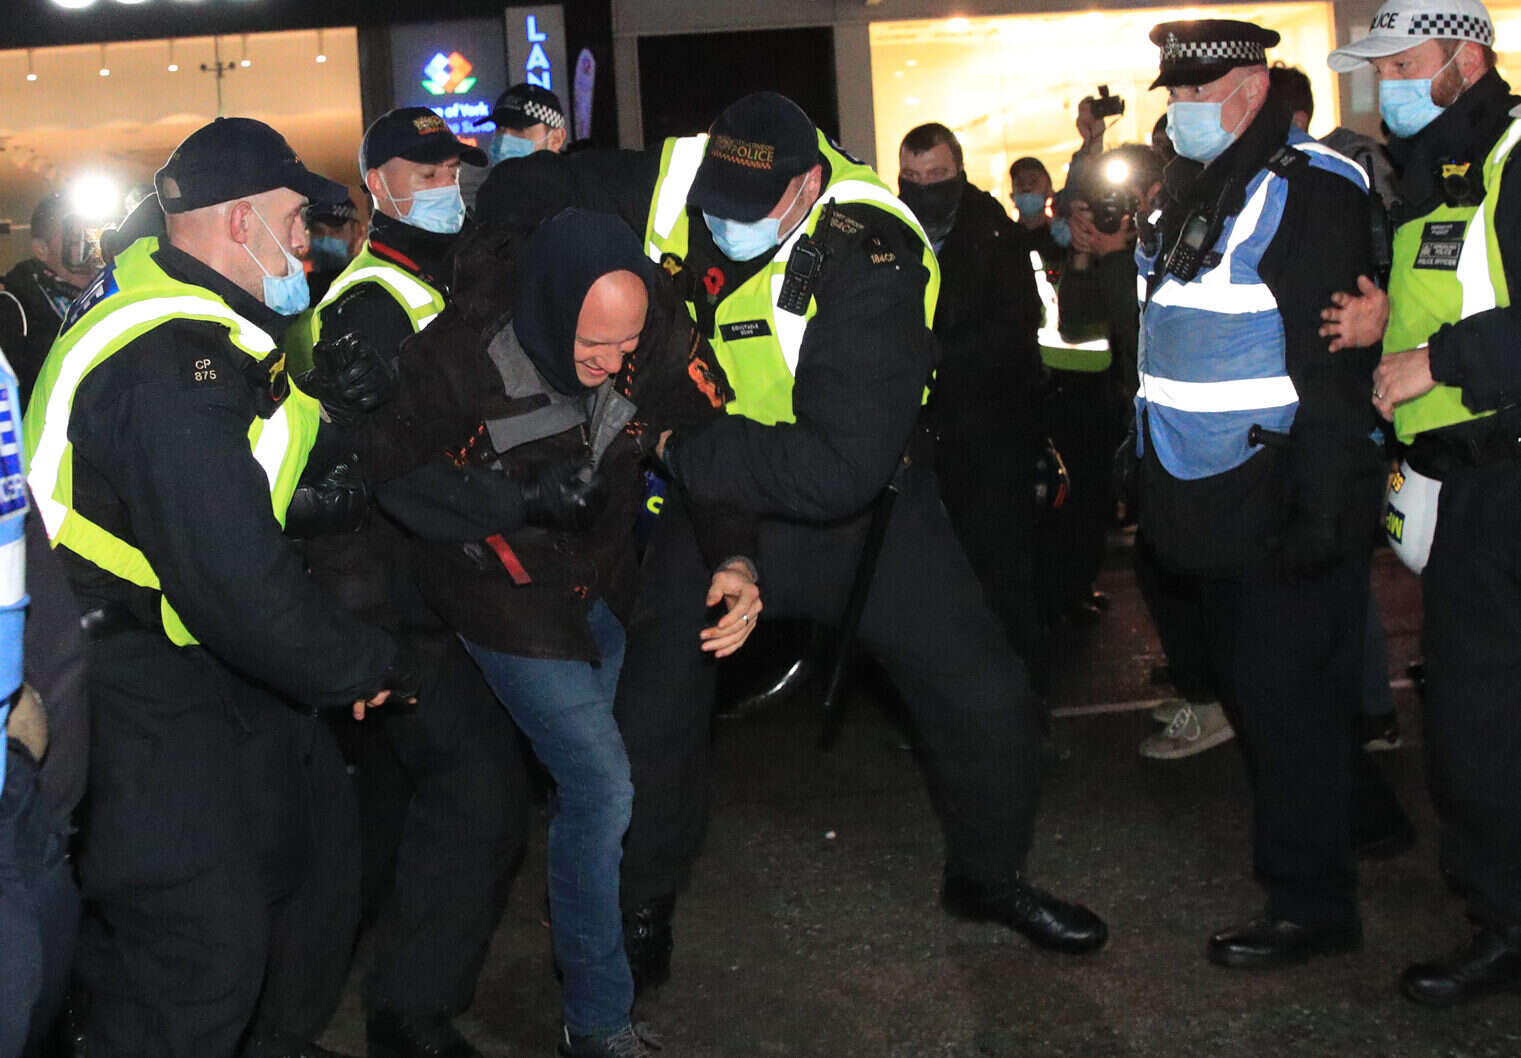 Police apologise after journalists threatened with arrest at anti-lockdown protest